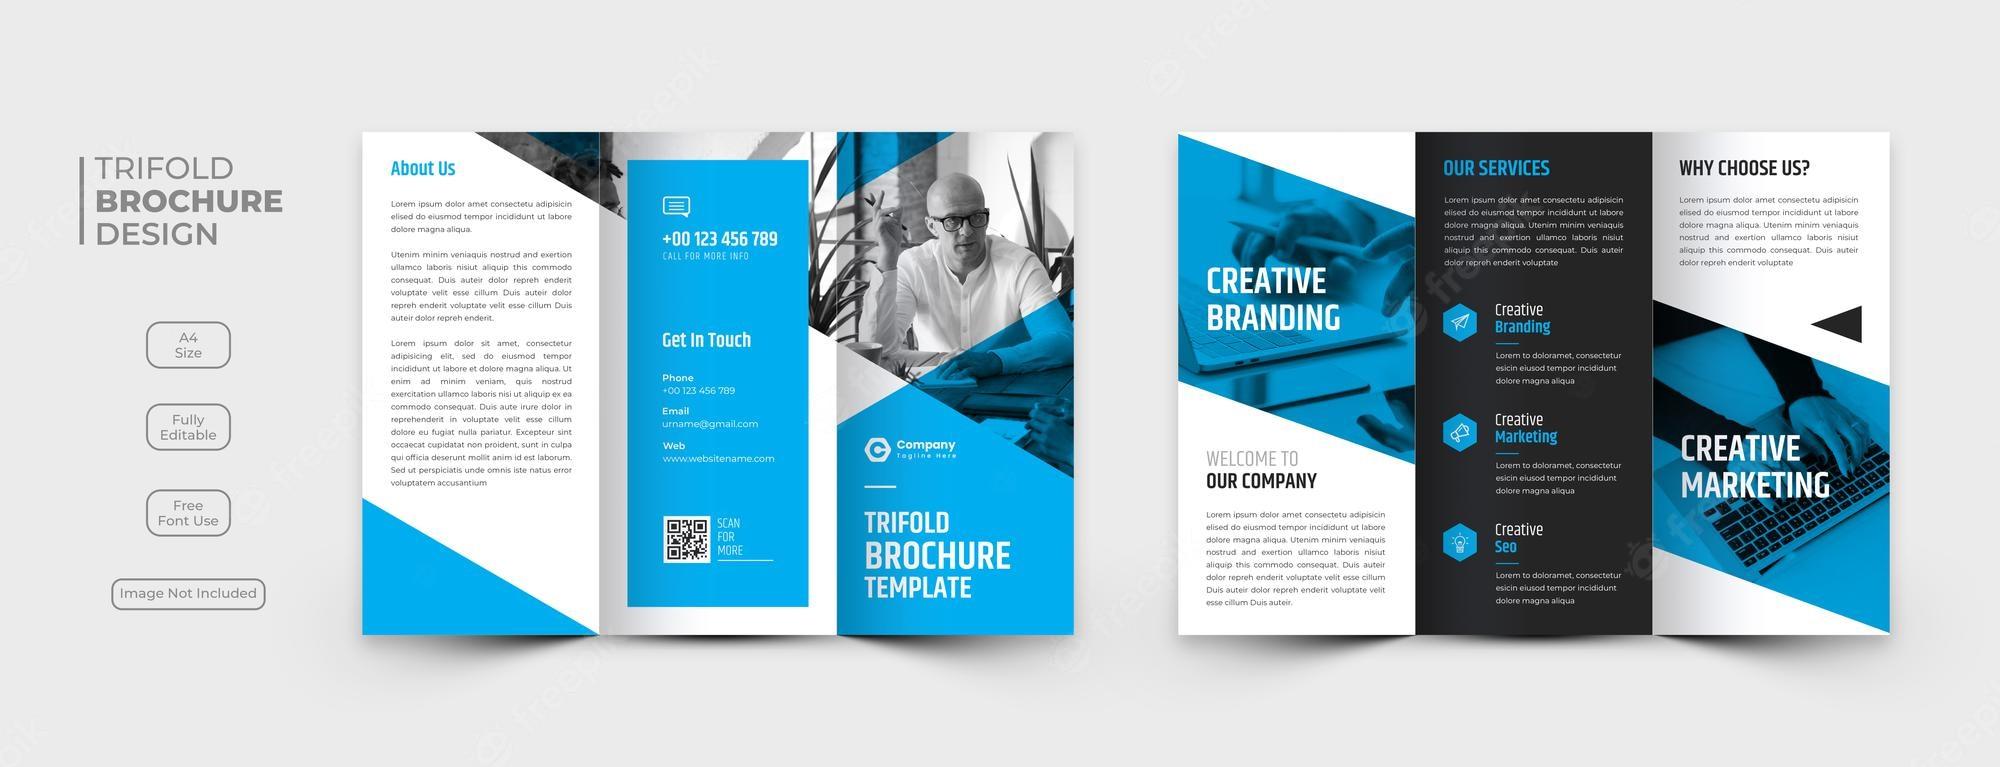 Brochure template - Free Vectors & PSD Download With Regard To Welcome Brochure Template